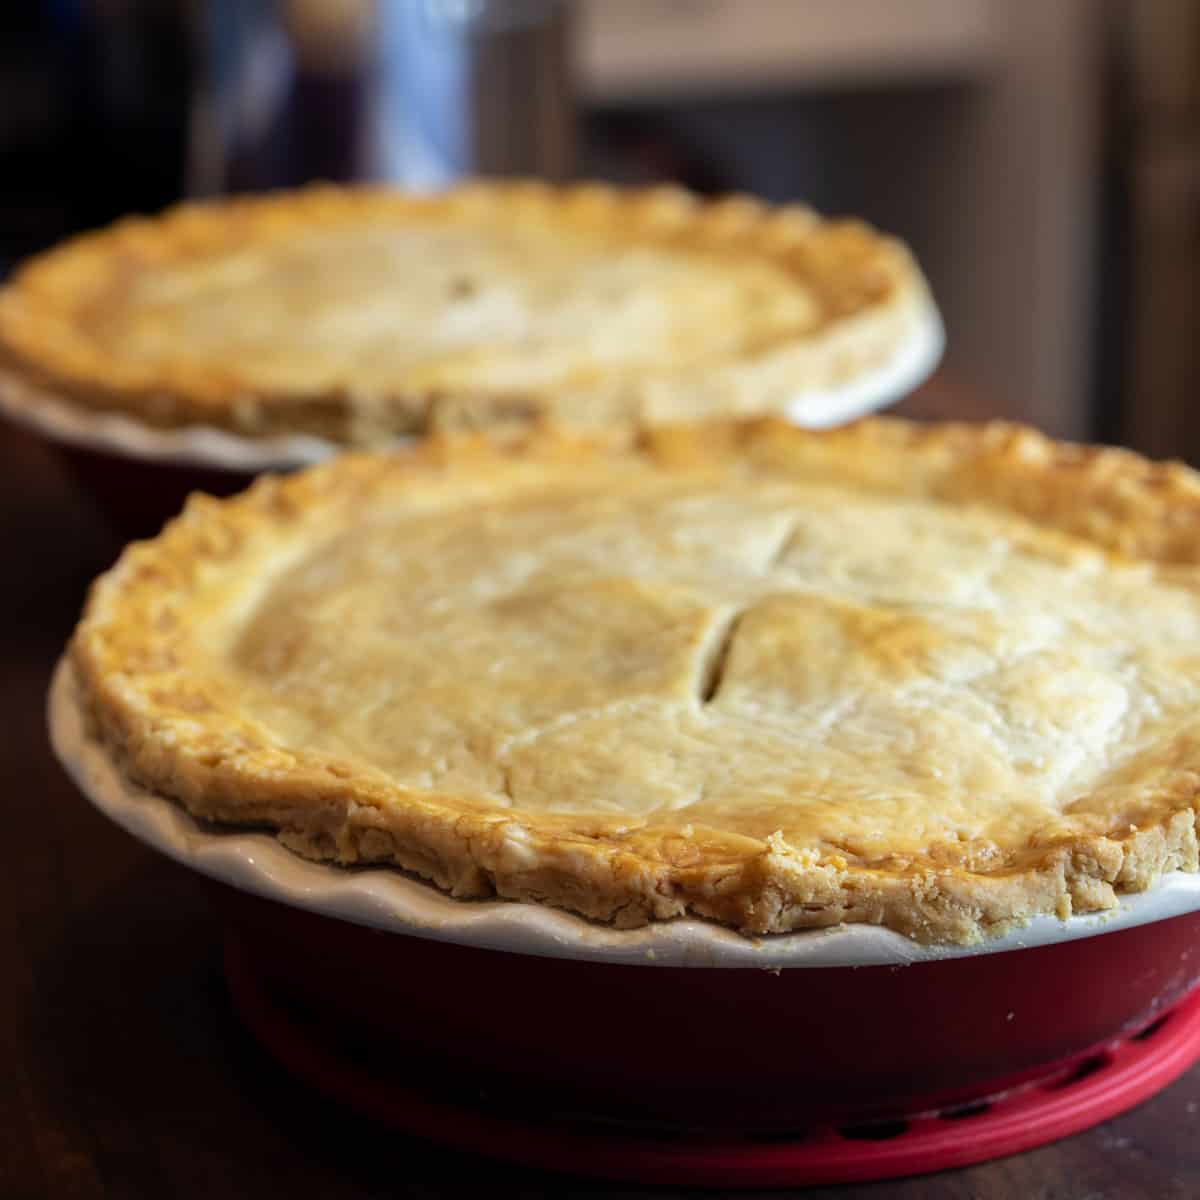 Two fresh baked pies.